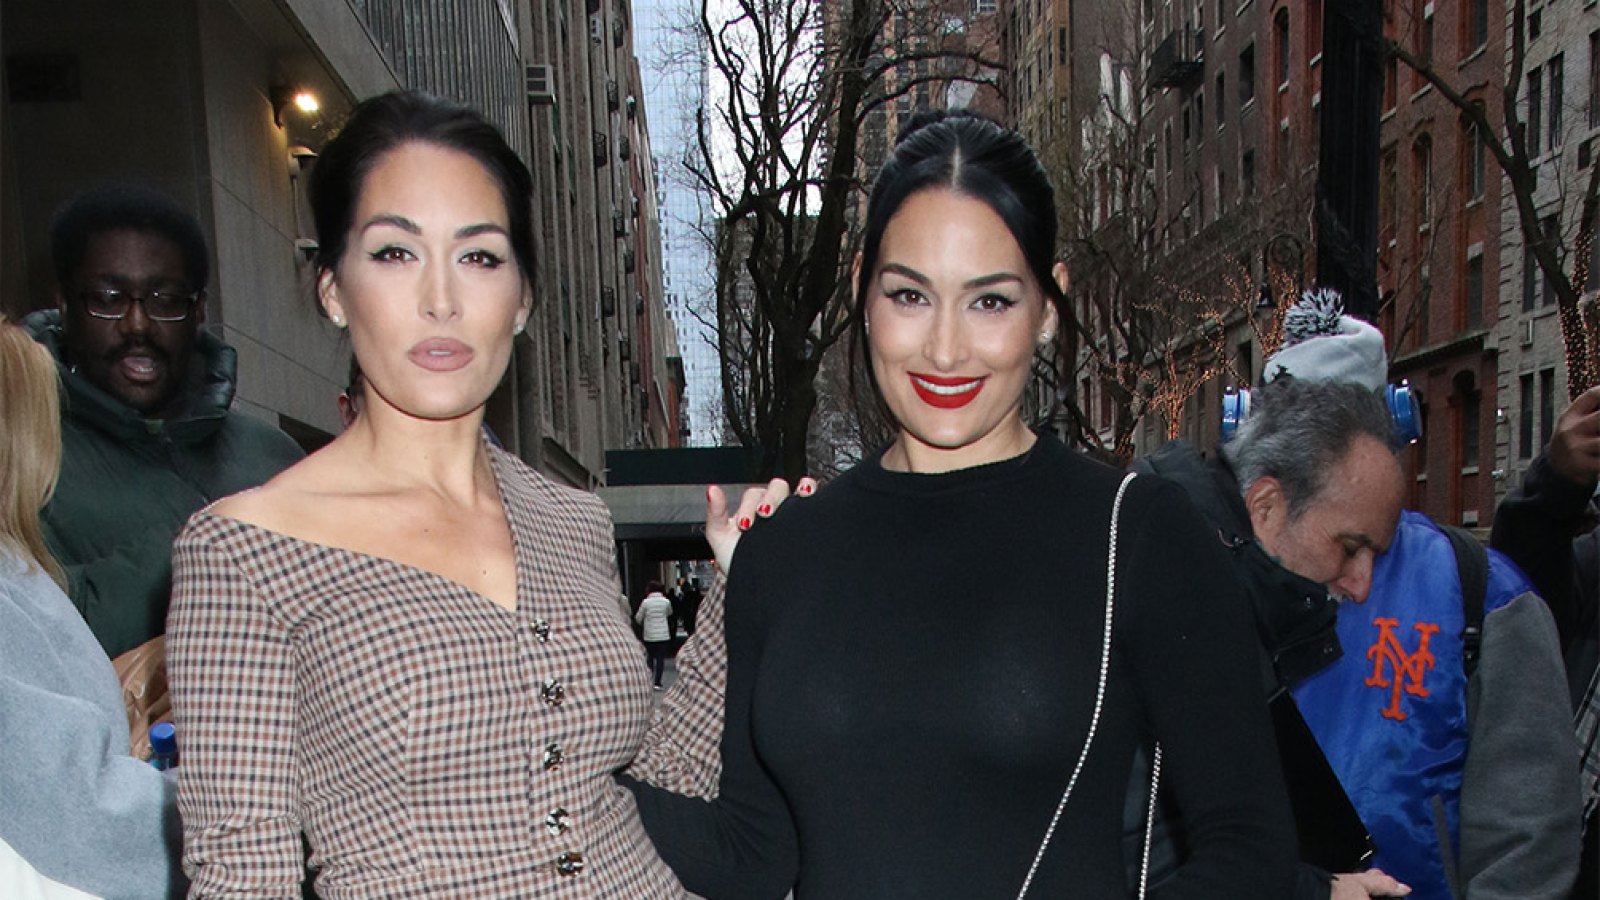 The Bella Twins are Leaving WWE Will Use Their Real Name Garcia